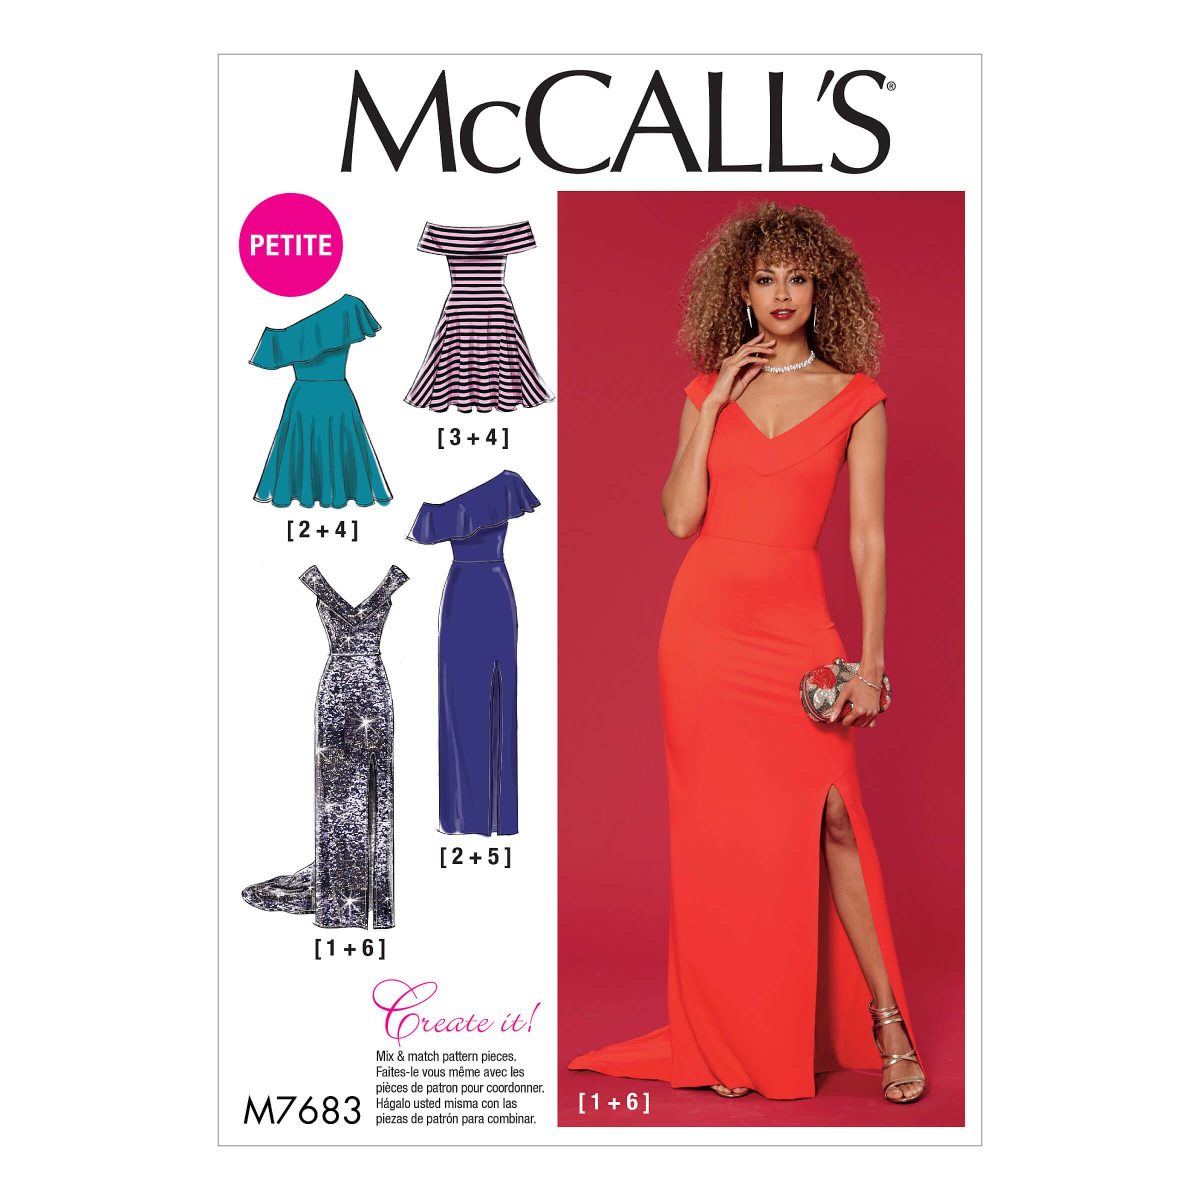 McCall's Sewing Pattern M7683 Misses'/Miss Petite Dresses with Shoulder and Skirt Variations